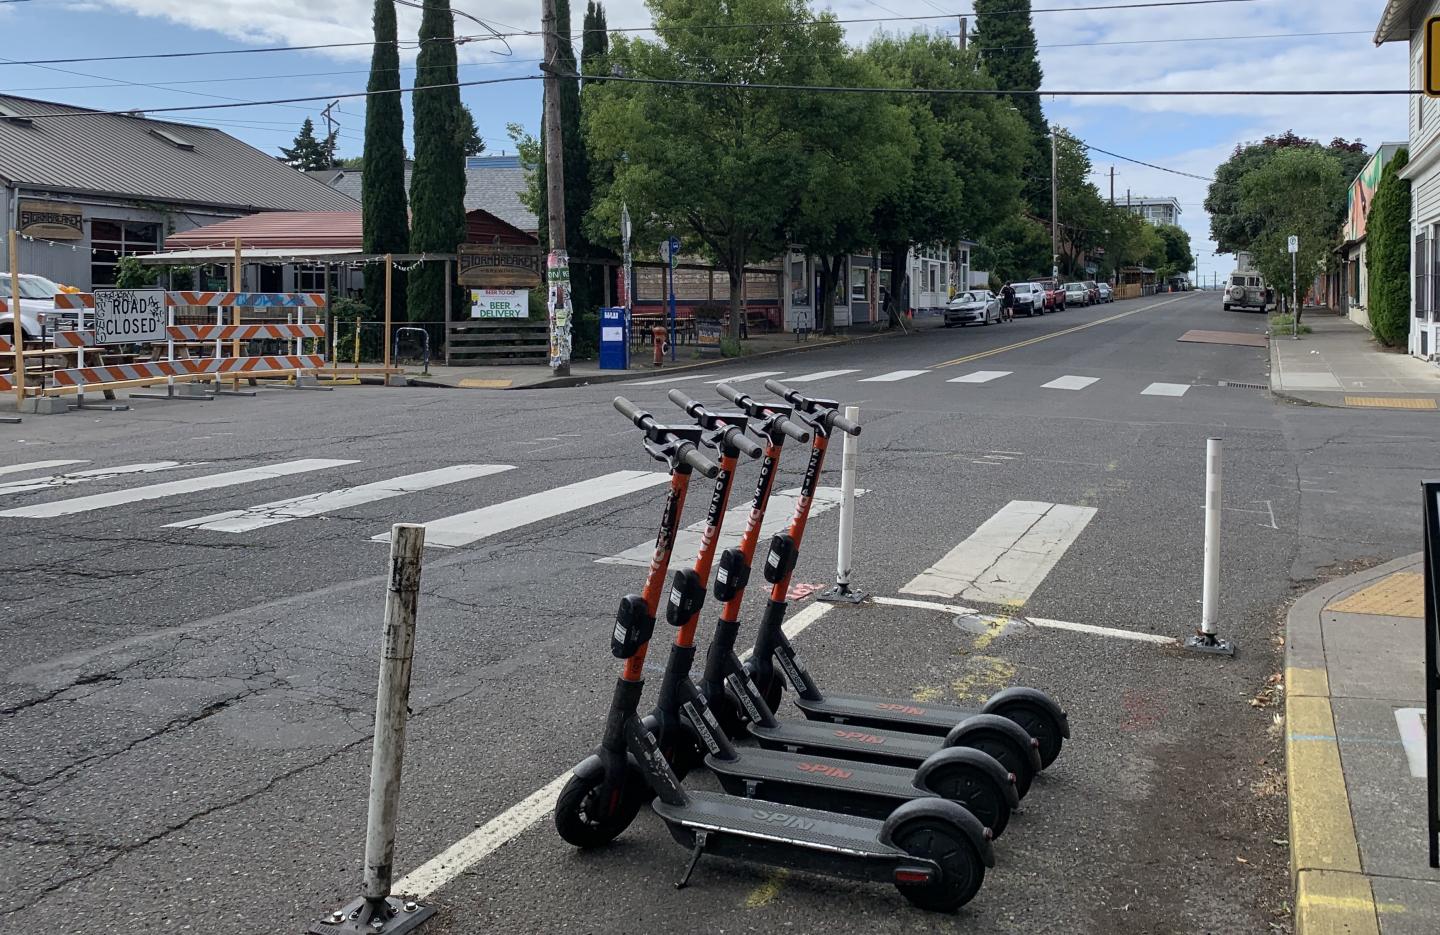 Curbside Parking for E-scooters